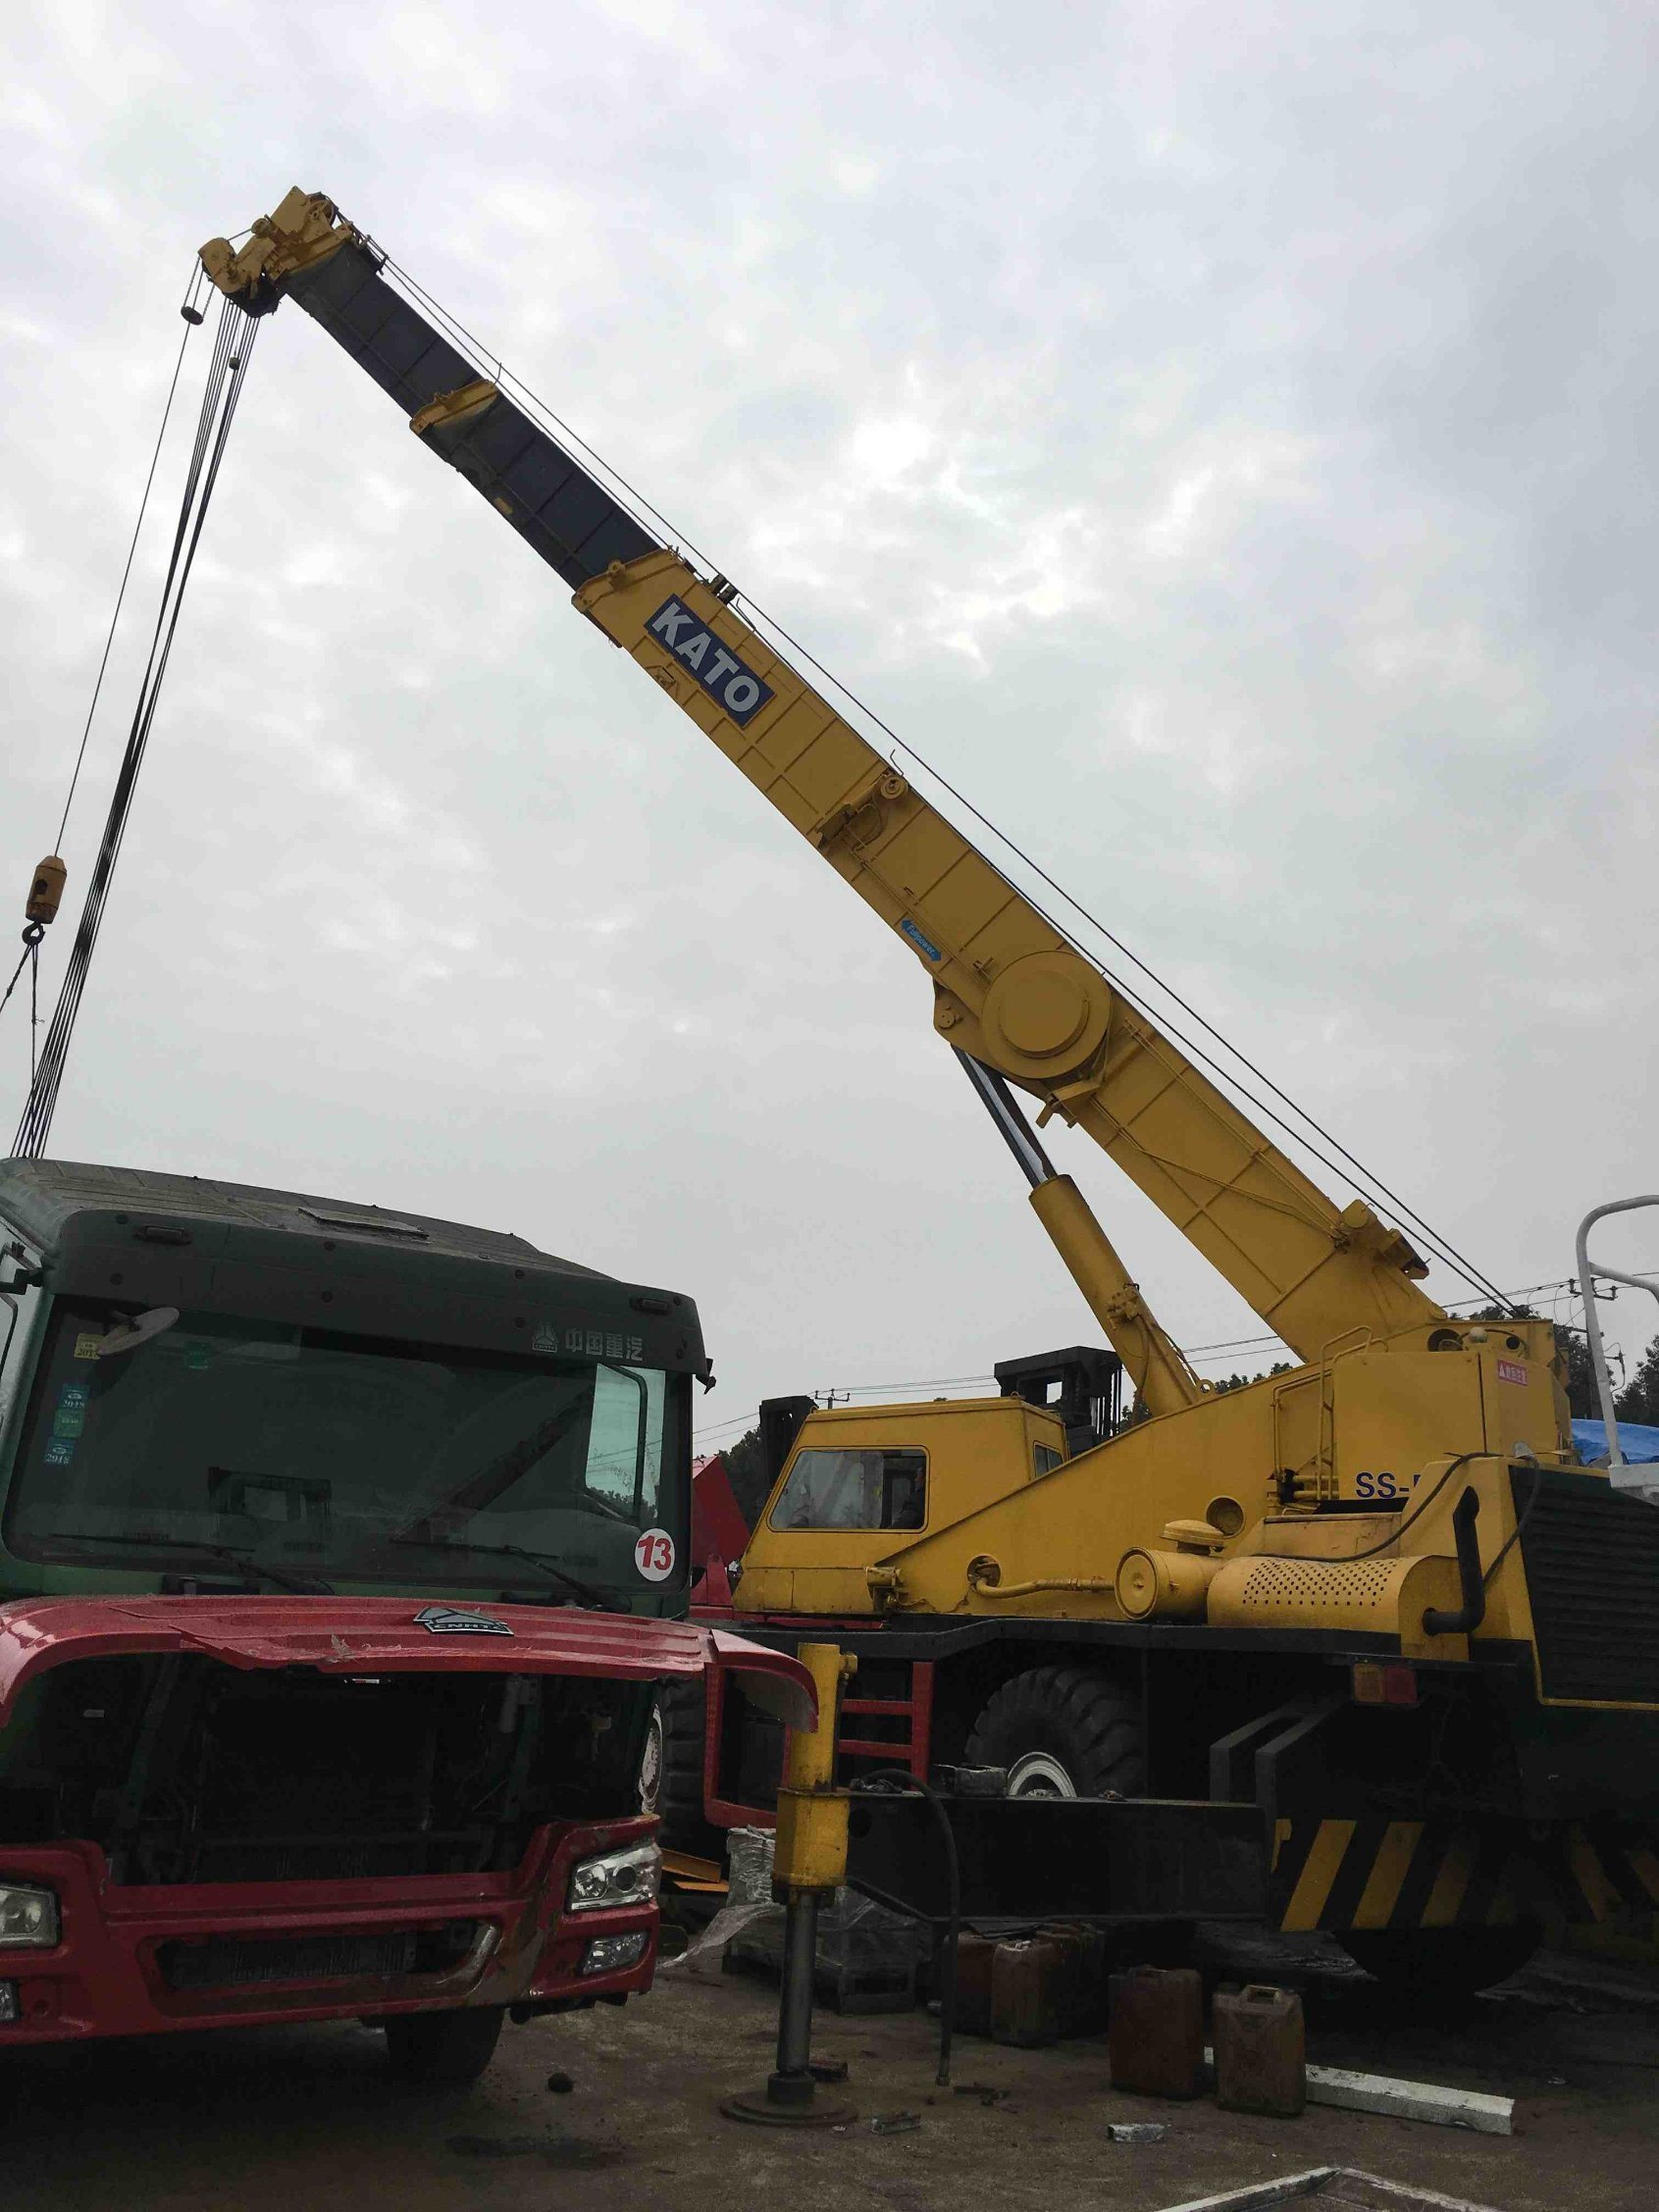 Used Kato 50t Rough Terrain Crane with Good Condition in Cheap Price